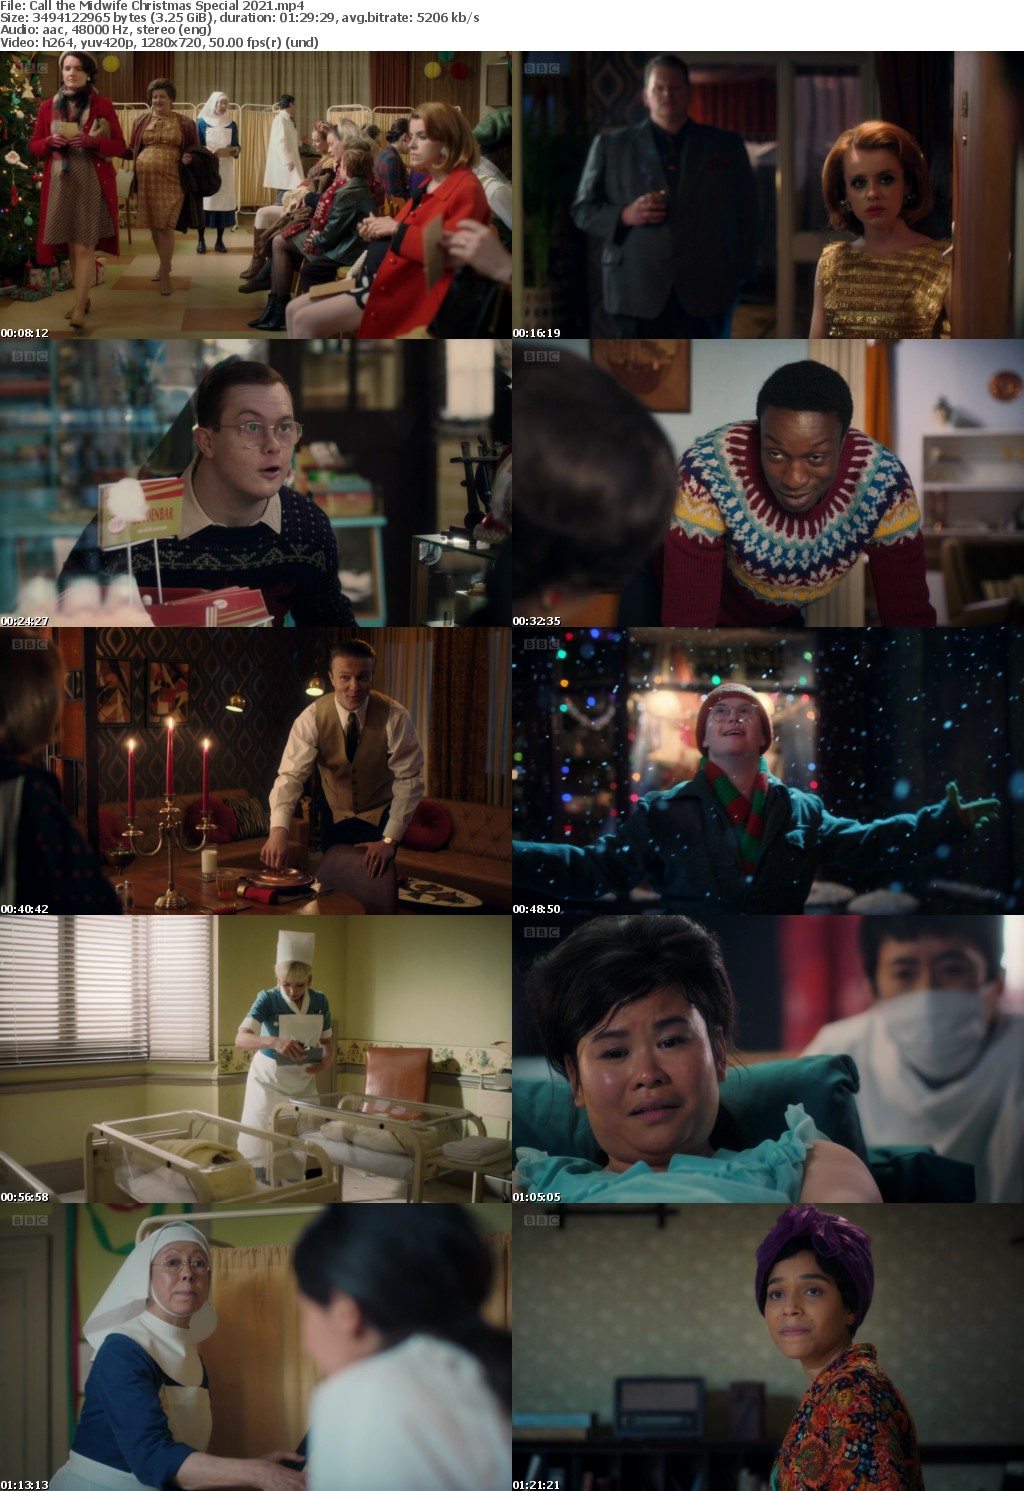 Call the Midwife Christmas Special 2021 (1280x720p HD, 50fps, soft Eng subs)